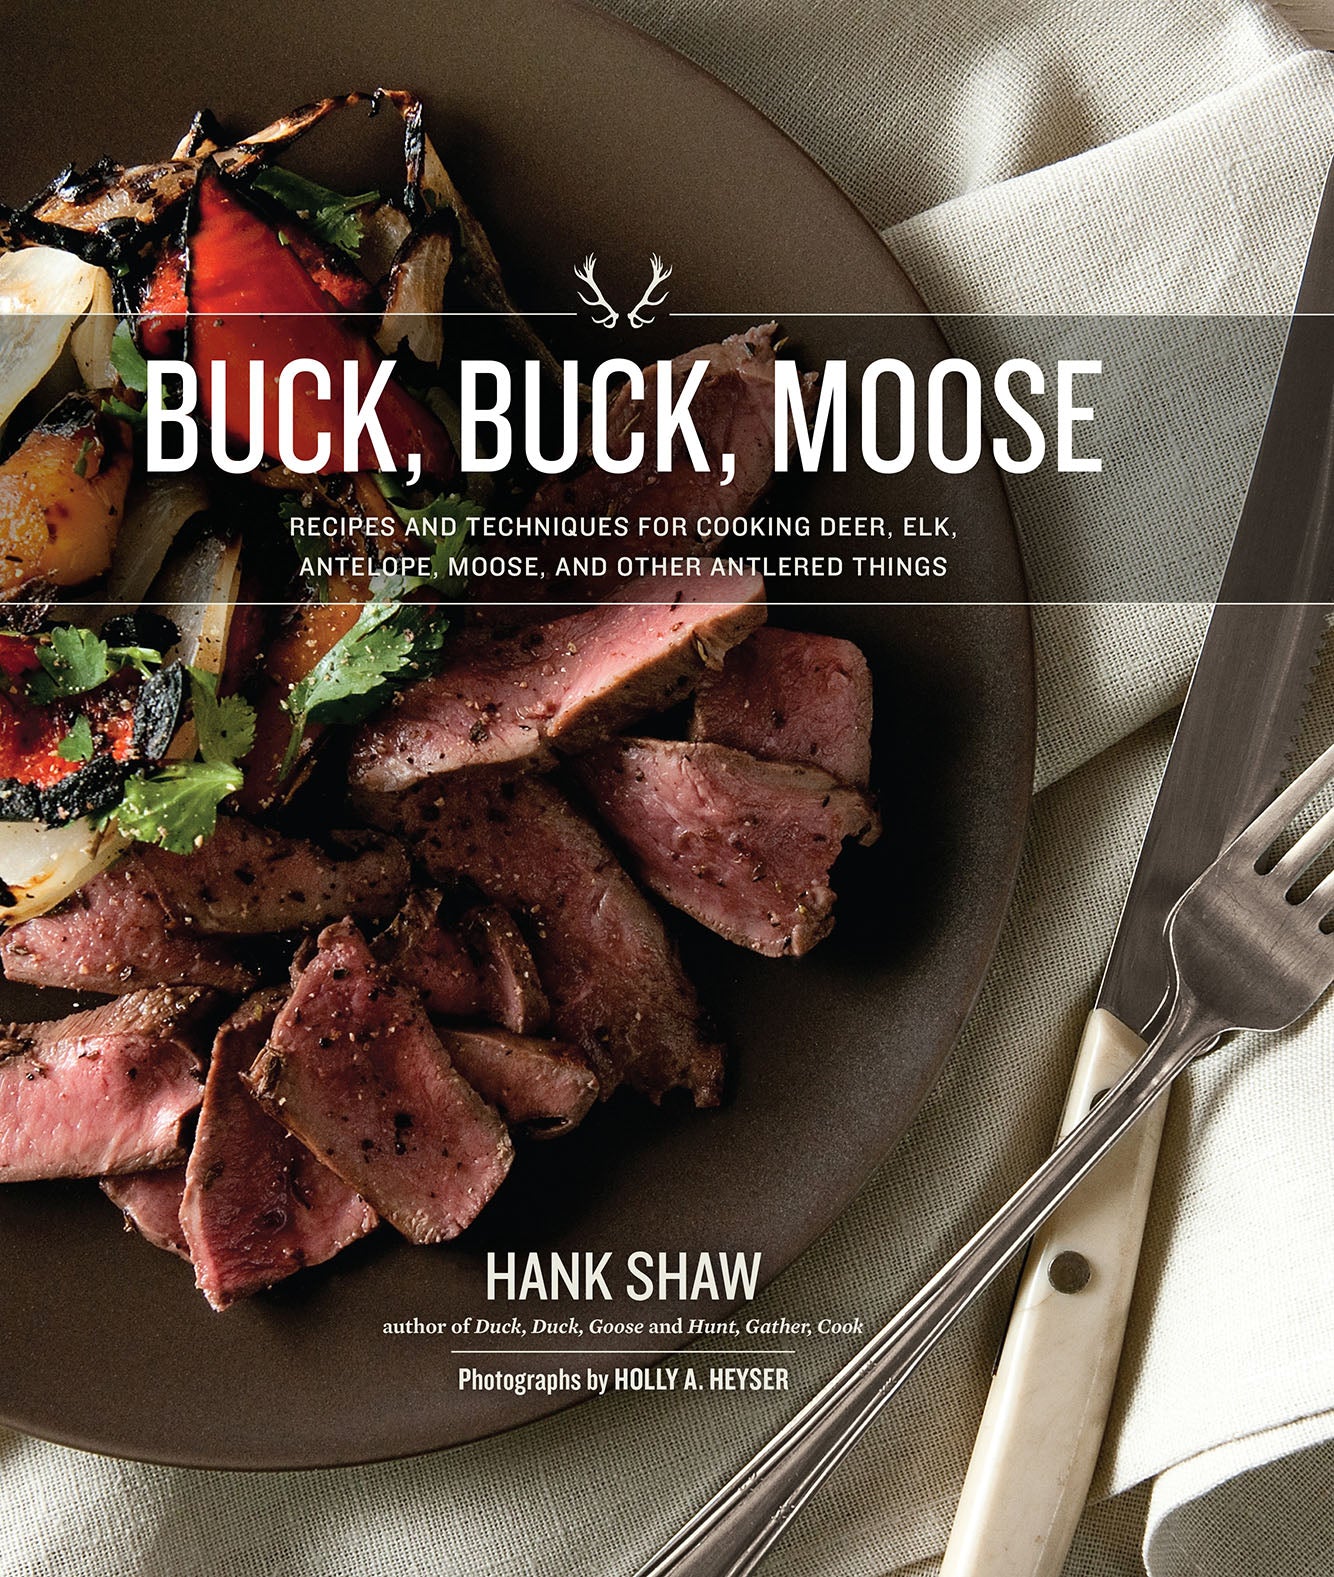 Buck, Buck, Moose  Recipes and Techniques for Cooking Deer, Elk, Moose, Antelope and Other Antlered Things by Hank Shaw